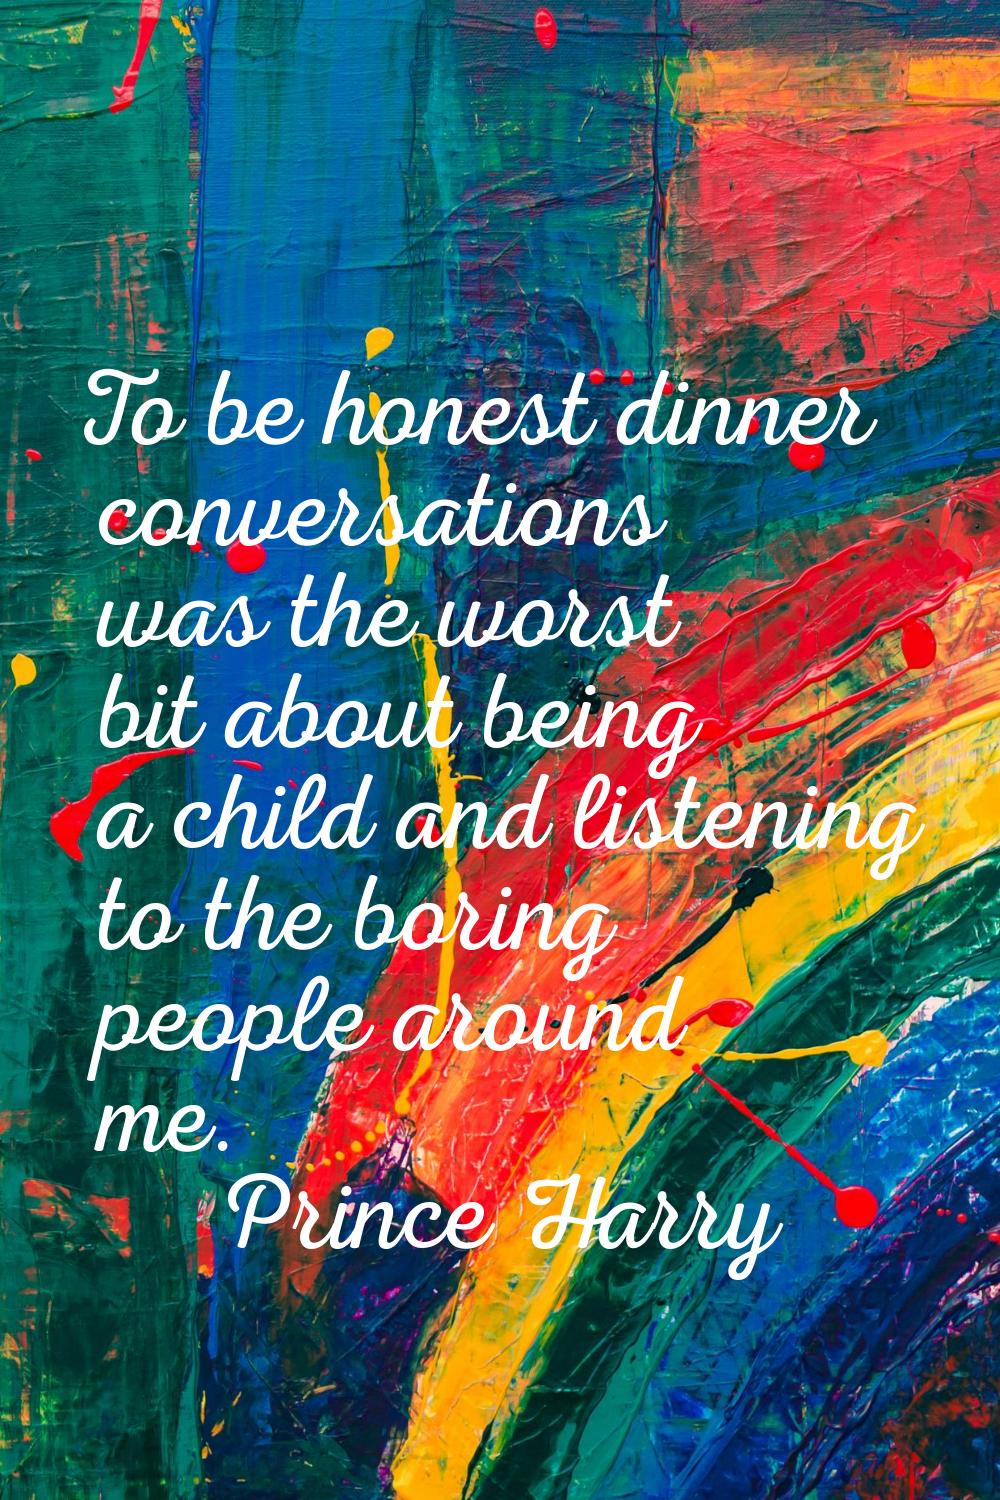 To be honest dinner conversations was the worst bit about being a child and listening to the boring